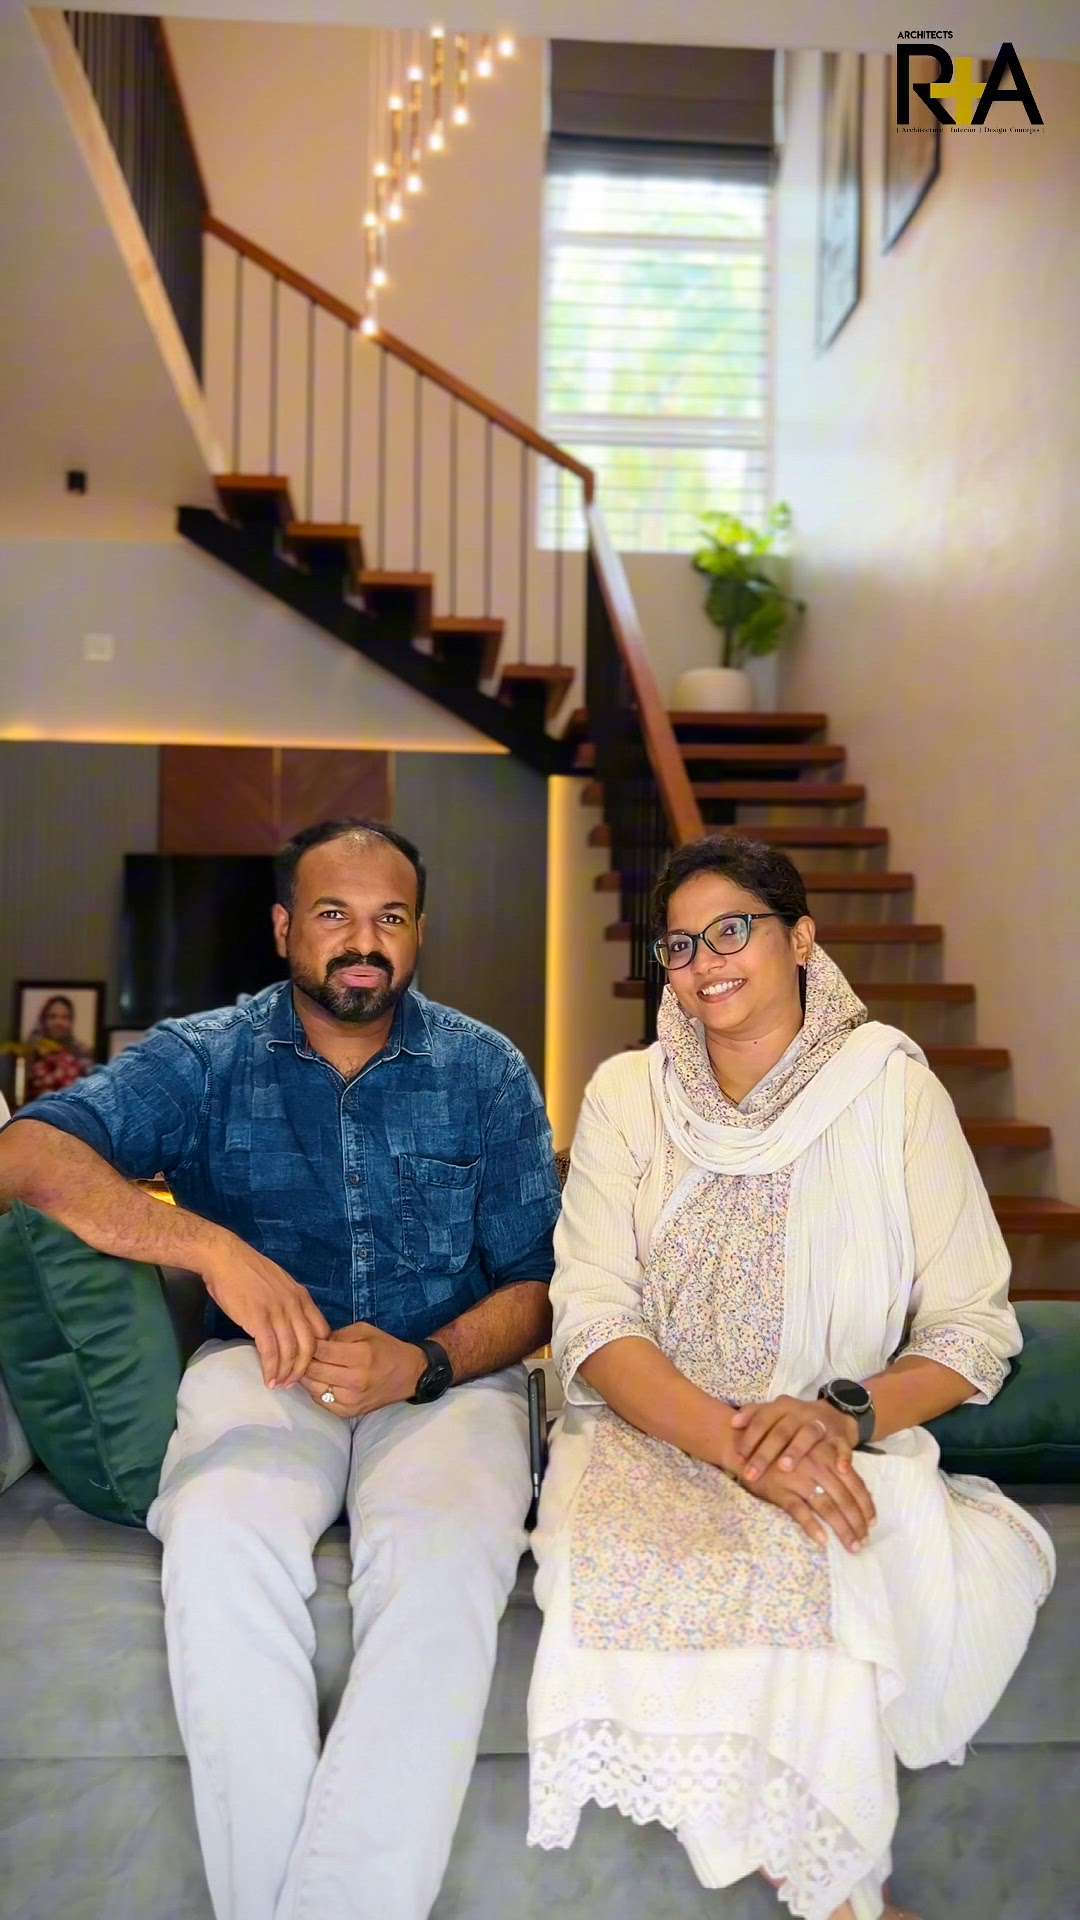 Happy clients ! 
. 
Thank you for trusting in us. 
. 
. 
. 
. 
. 
. 
. 
. 
. 
. 
. 
. 
. 
. 
. 
. 
. 
. 
. 
#keralahomes #kerala #architecture #keralahomedesign #interiordesign #homedecor #home #homesweethome #interior #keralaarchitecture #interiordesigner #homedesign #keralahomeplanners #homedesignideas #homedecoration #keralainteriordesign #bestarchitectsinkerala #architect #archdaily #ddesign #homestyling #traditional #keralahome #freekeralahomeplans #homeplans #keralahouse #exteriordesign #architecturedesign #ddrawing #rolusaarchitects